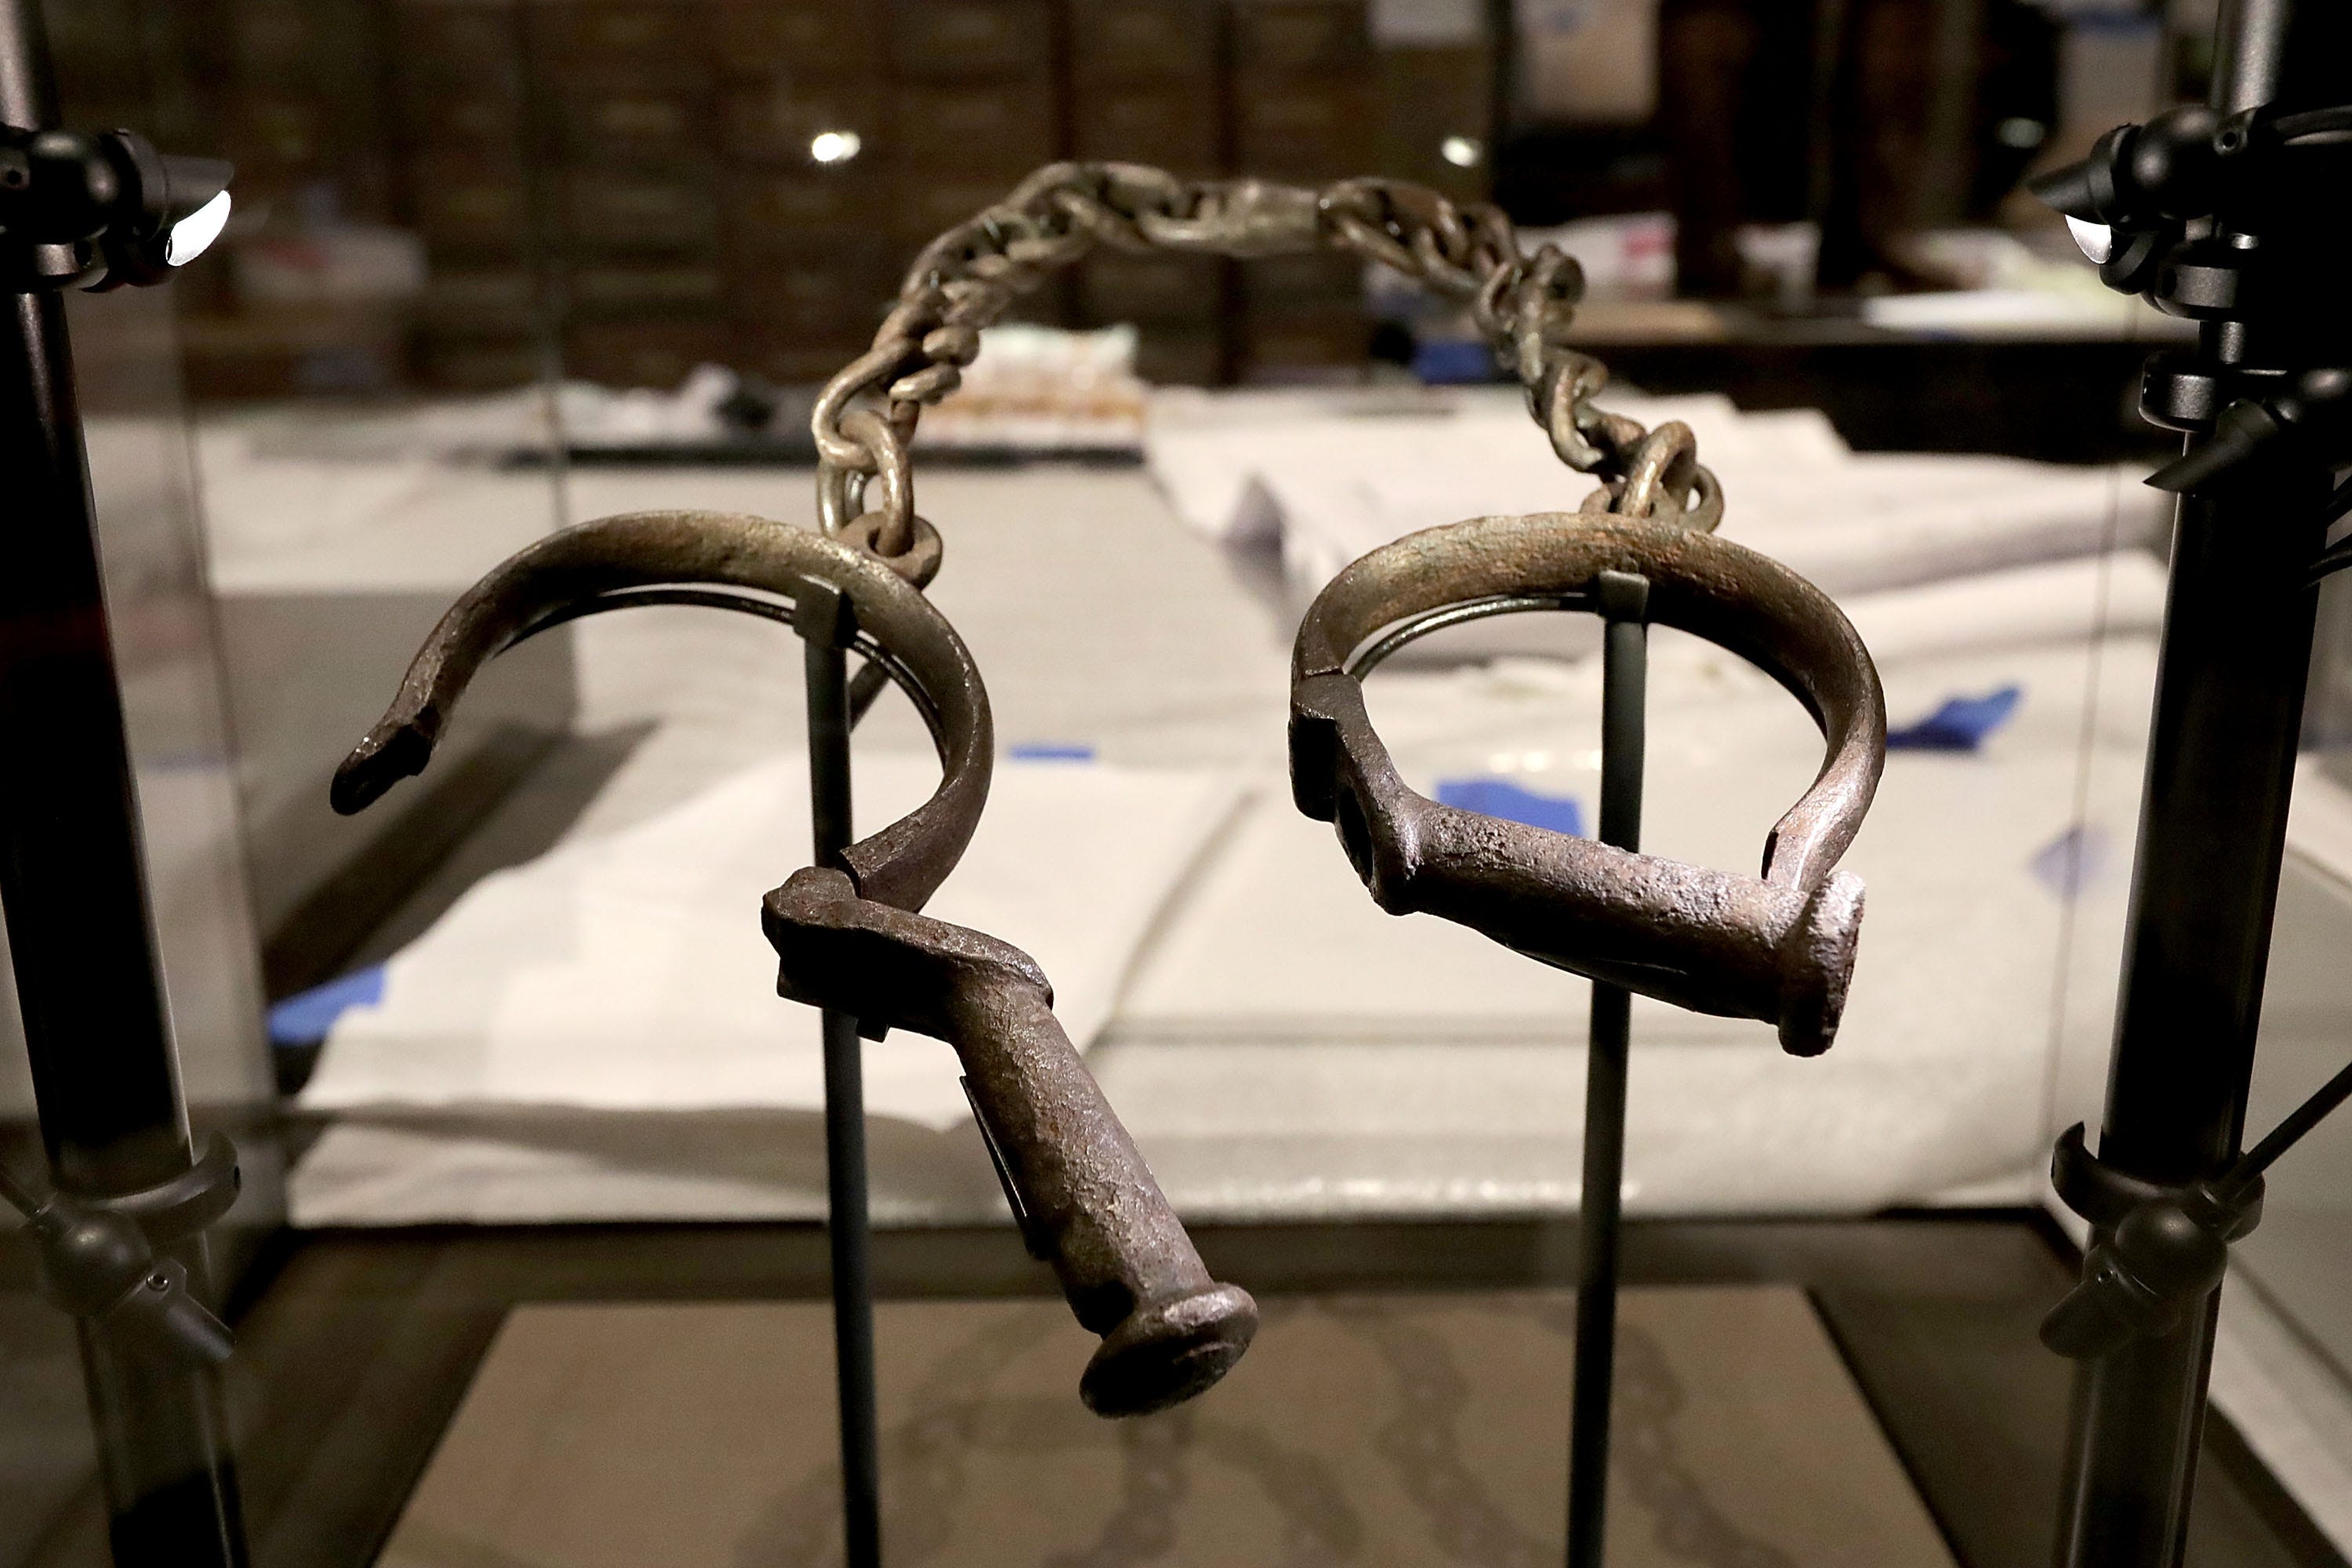 A pair of slave shackles on display in the Slavery and Freedom Gallery in the Smithsonian's National Museum of African American History and Culture. Columnists Alexander and Turner draw a line between the country's legacy of slavery and the current need for reparations.